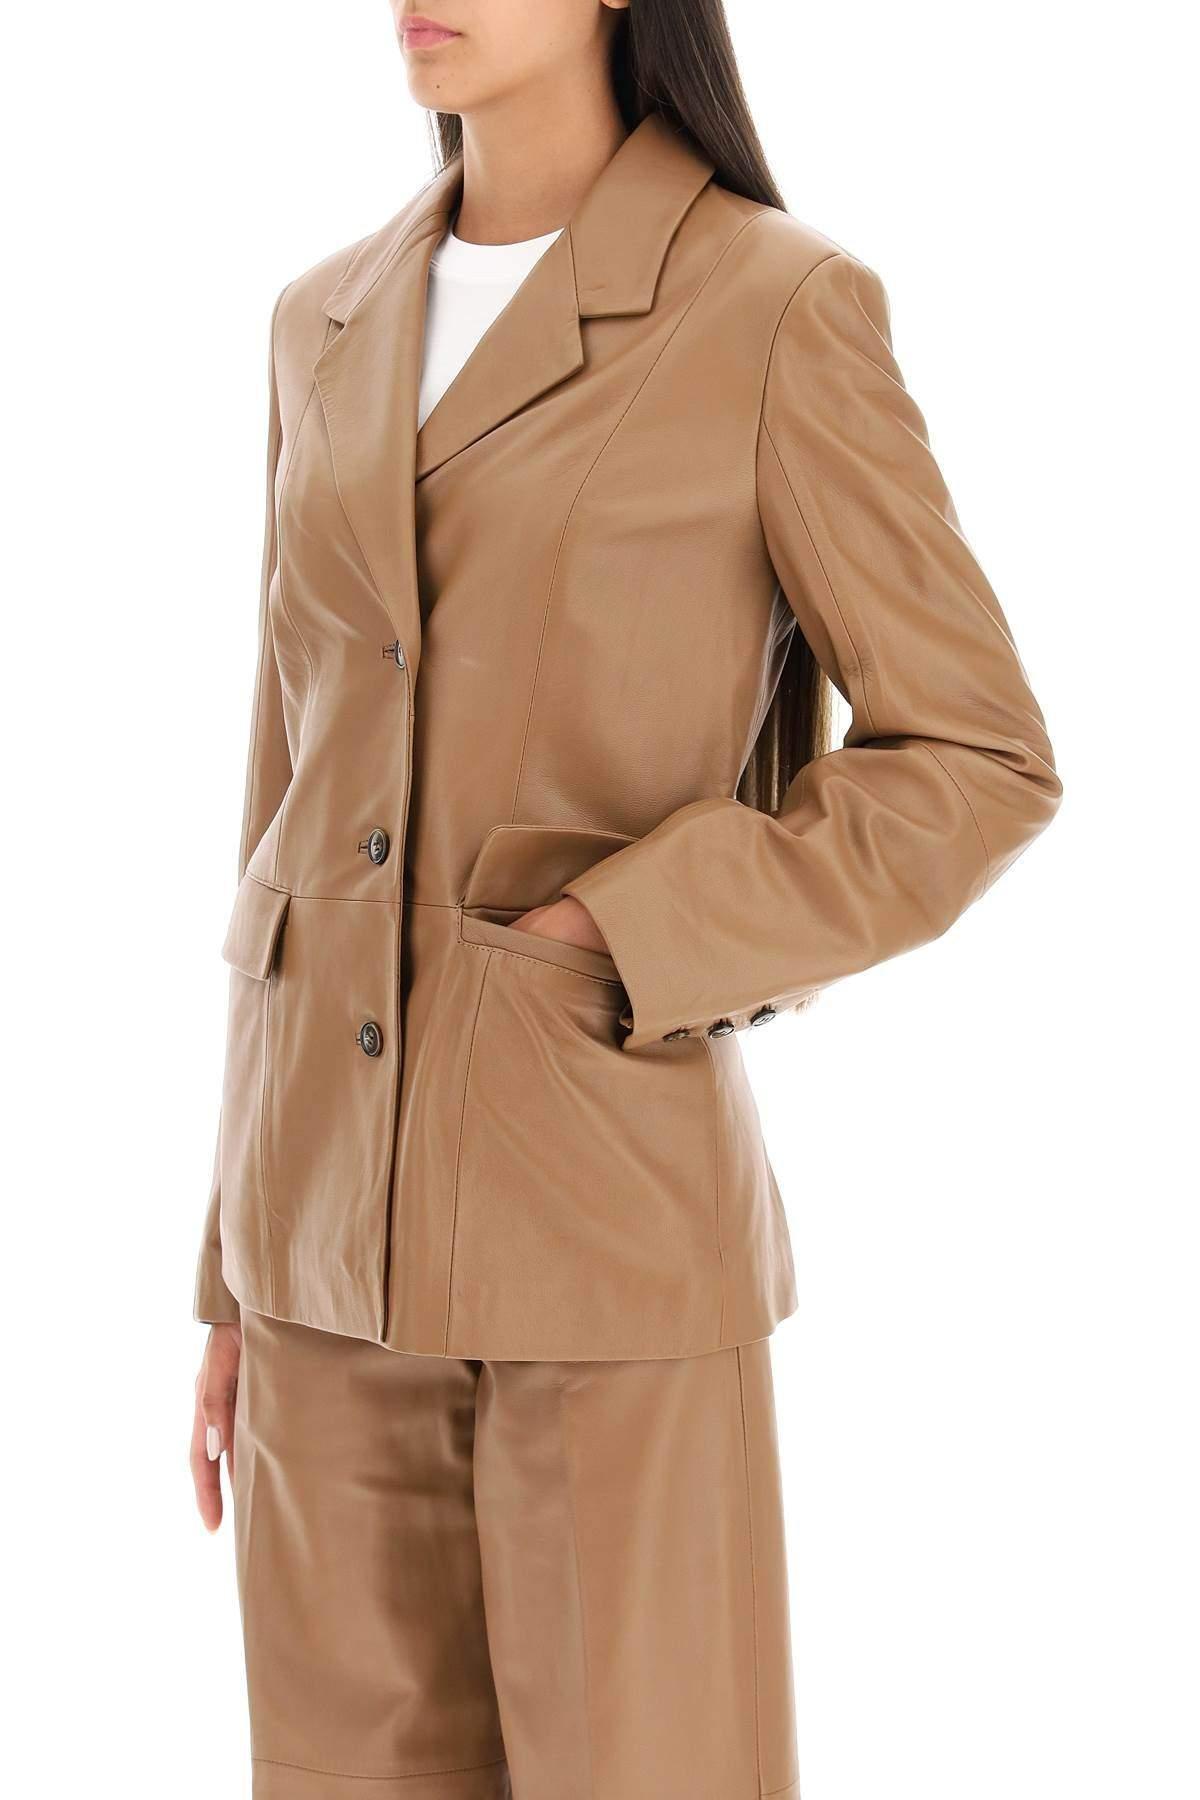 Loulou Studio stovset Nappa Leather Blazer in Camel - Save 2% Brown Womens Jackets Loulou Studio Jackets 